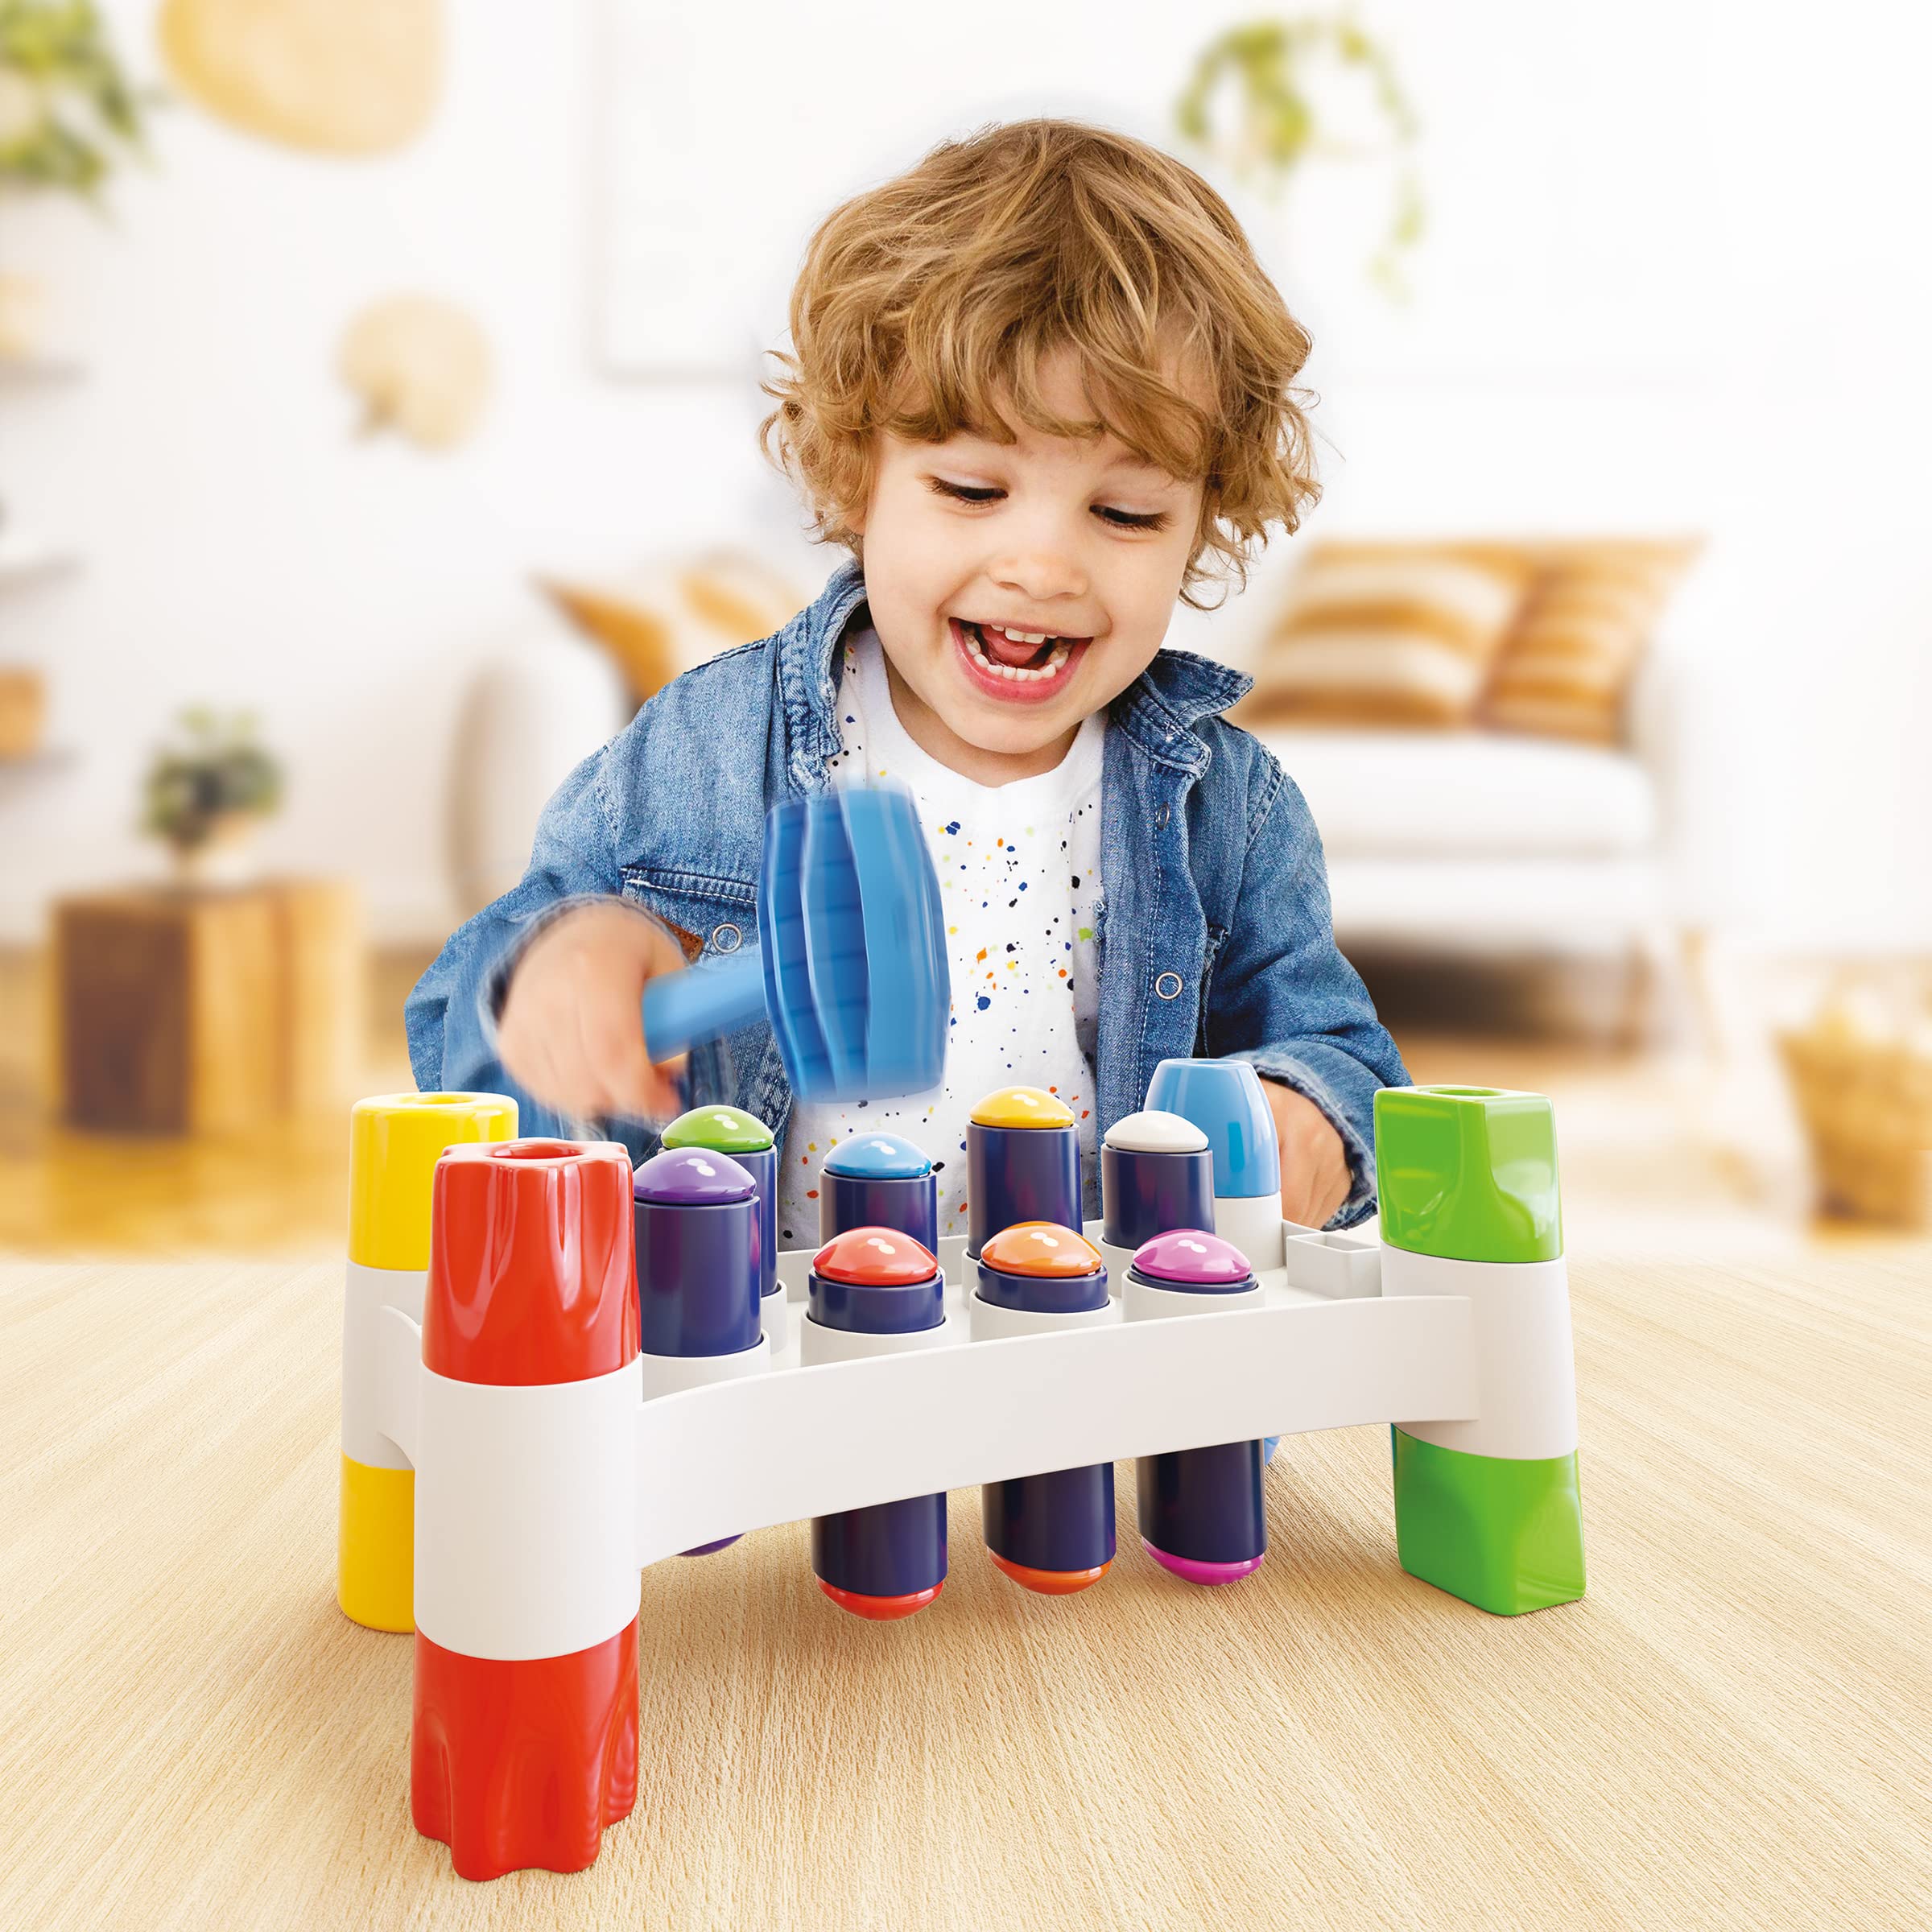 Quercetti Hammer Peggy Toy Pounding Bench for Toddlers - with 8 Colorful Pegs and Two Ways to Build and Play to Support Early Learning and Fine Motor Skills Development, for ages 18 months and up